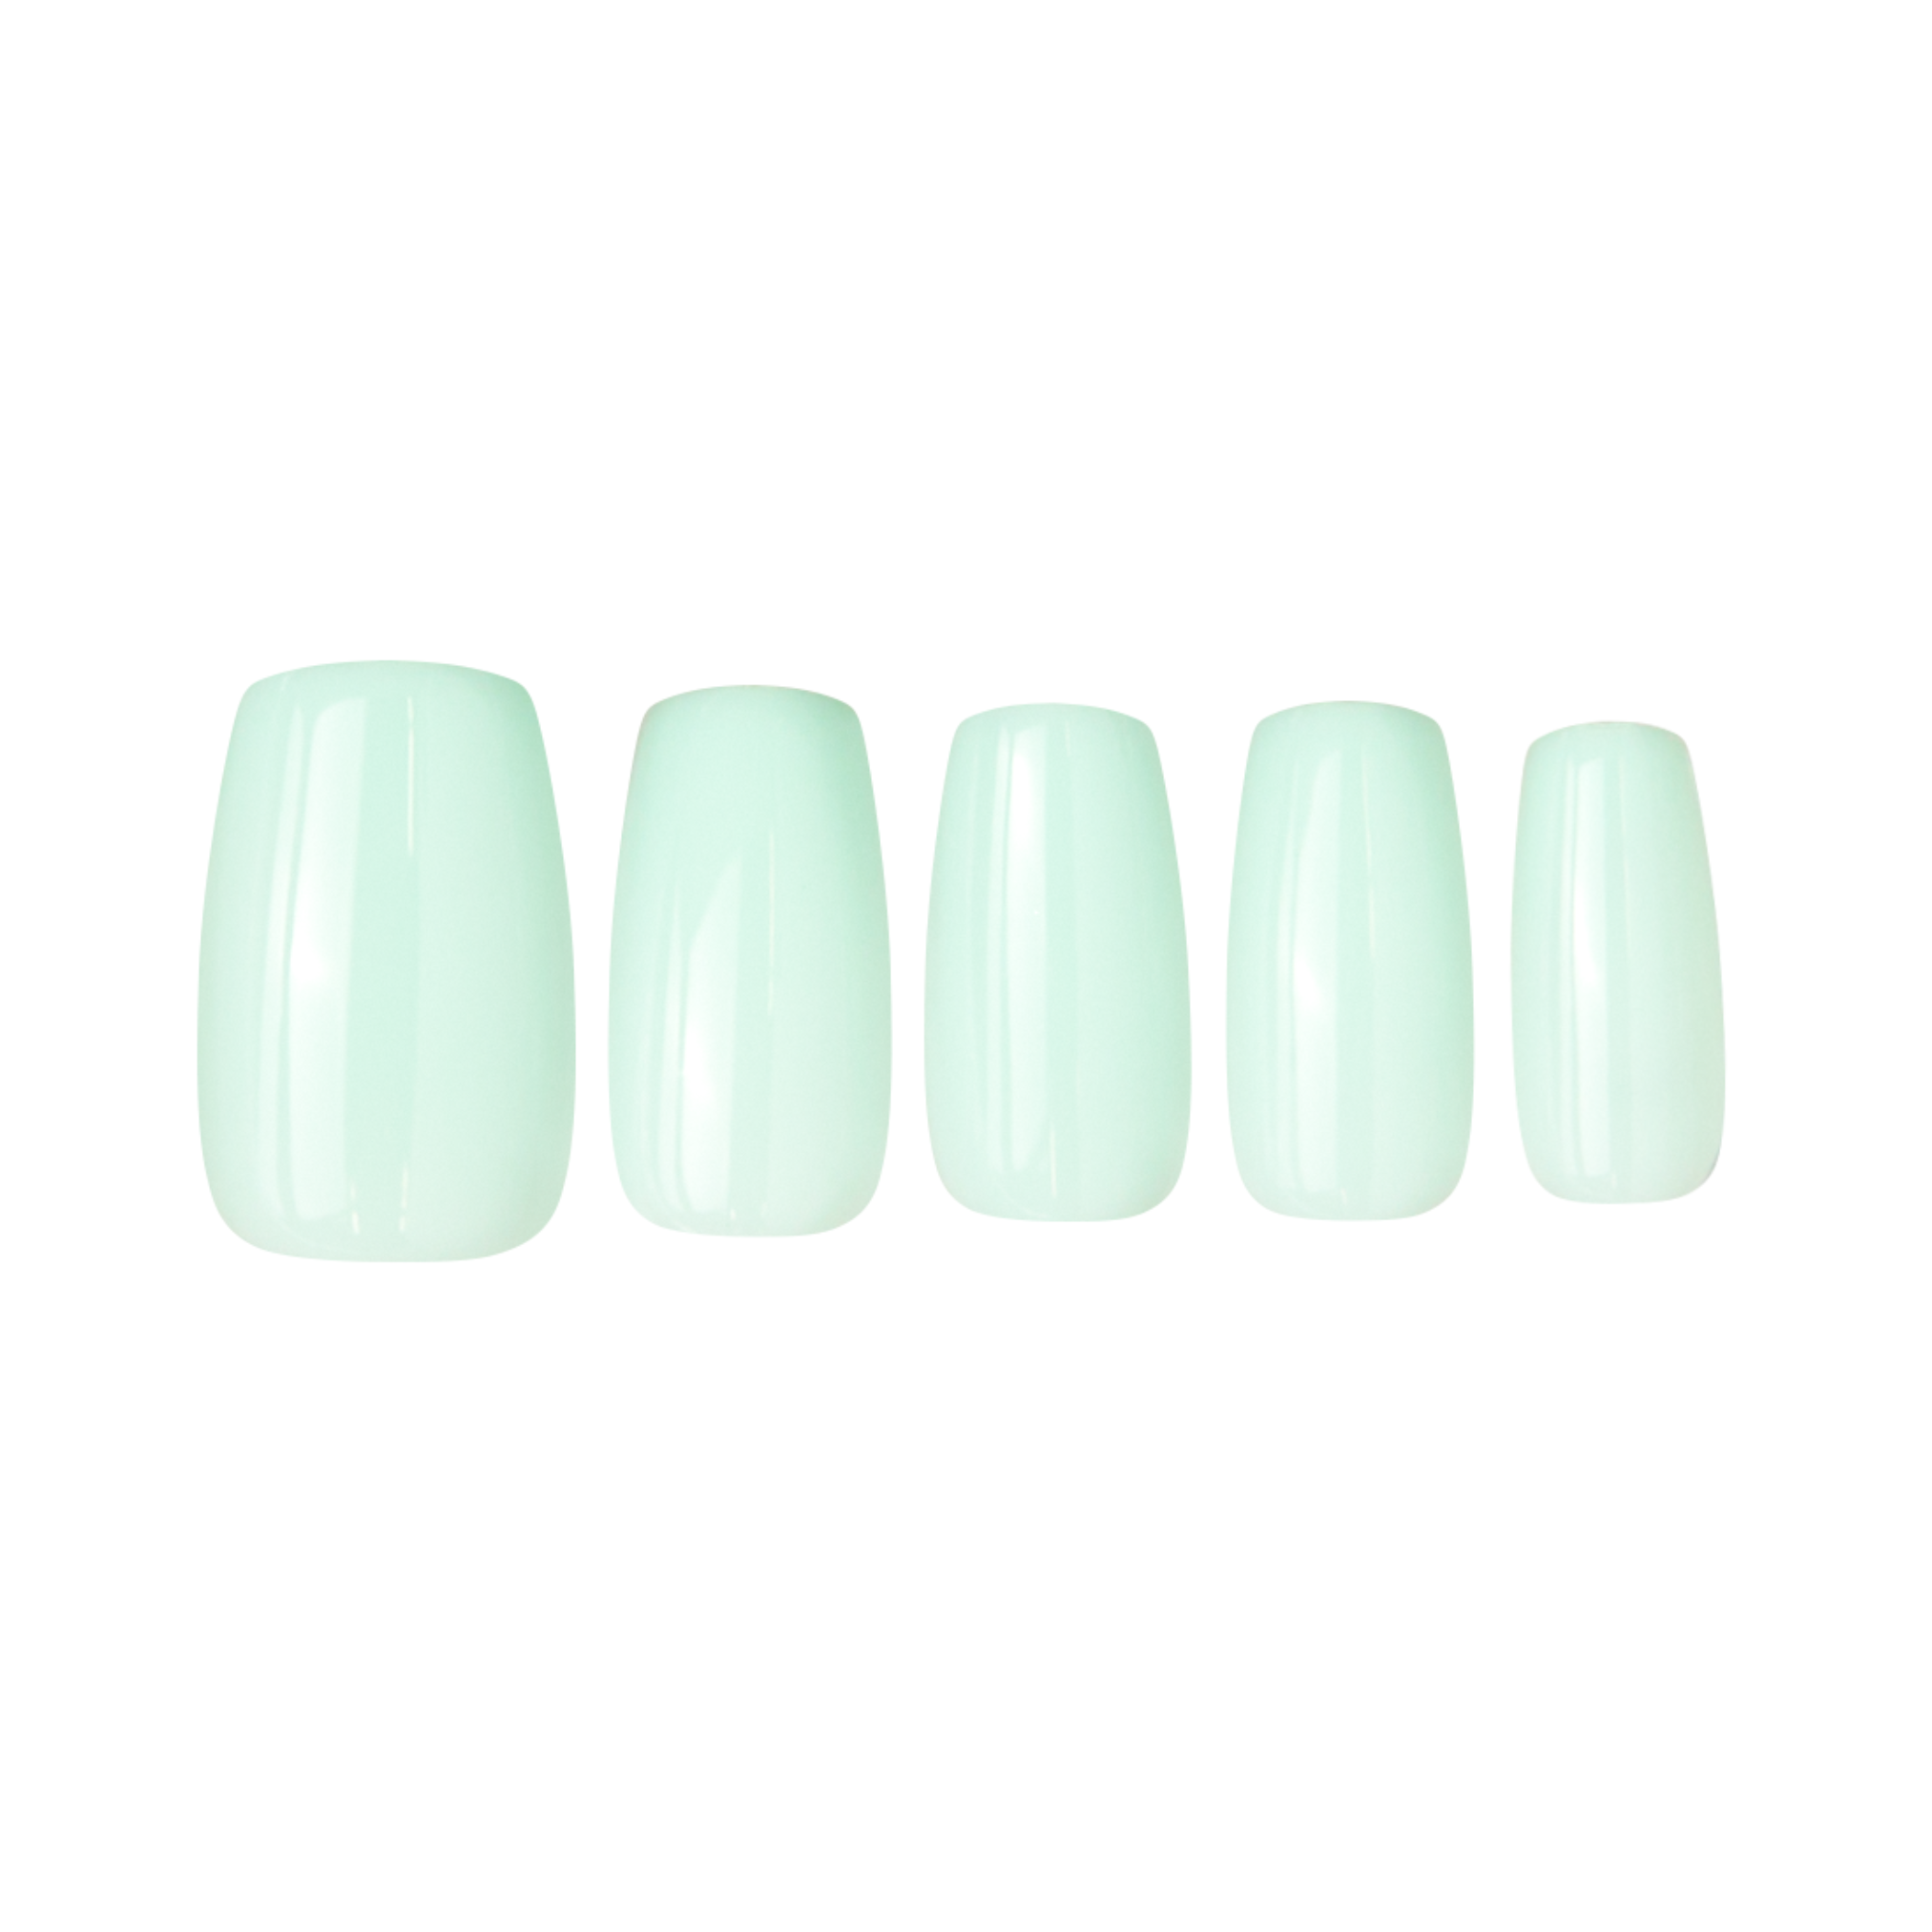 Meredith's Mint Julep Nails - Press On Nails | Red Aspen